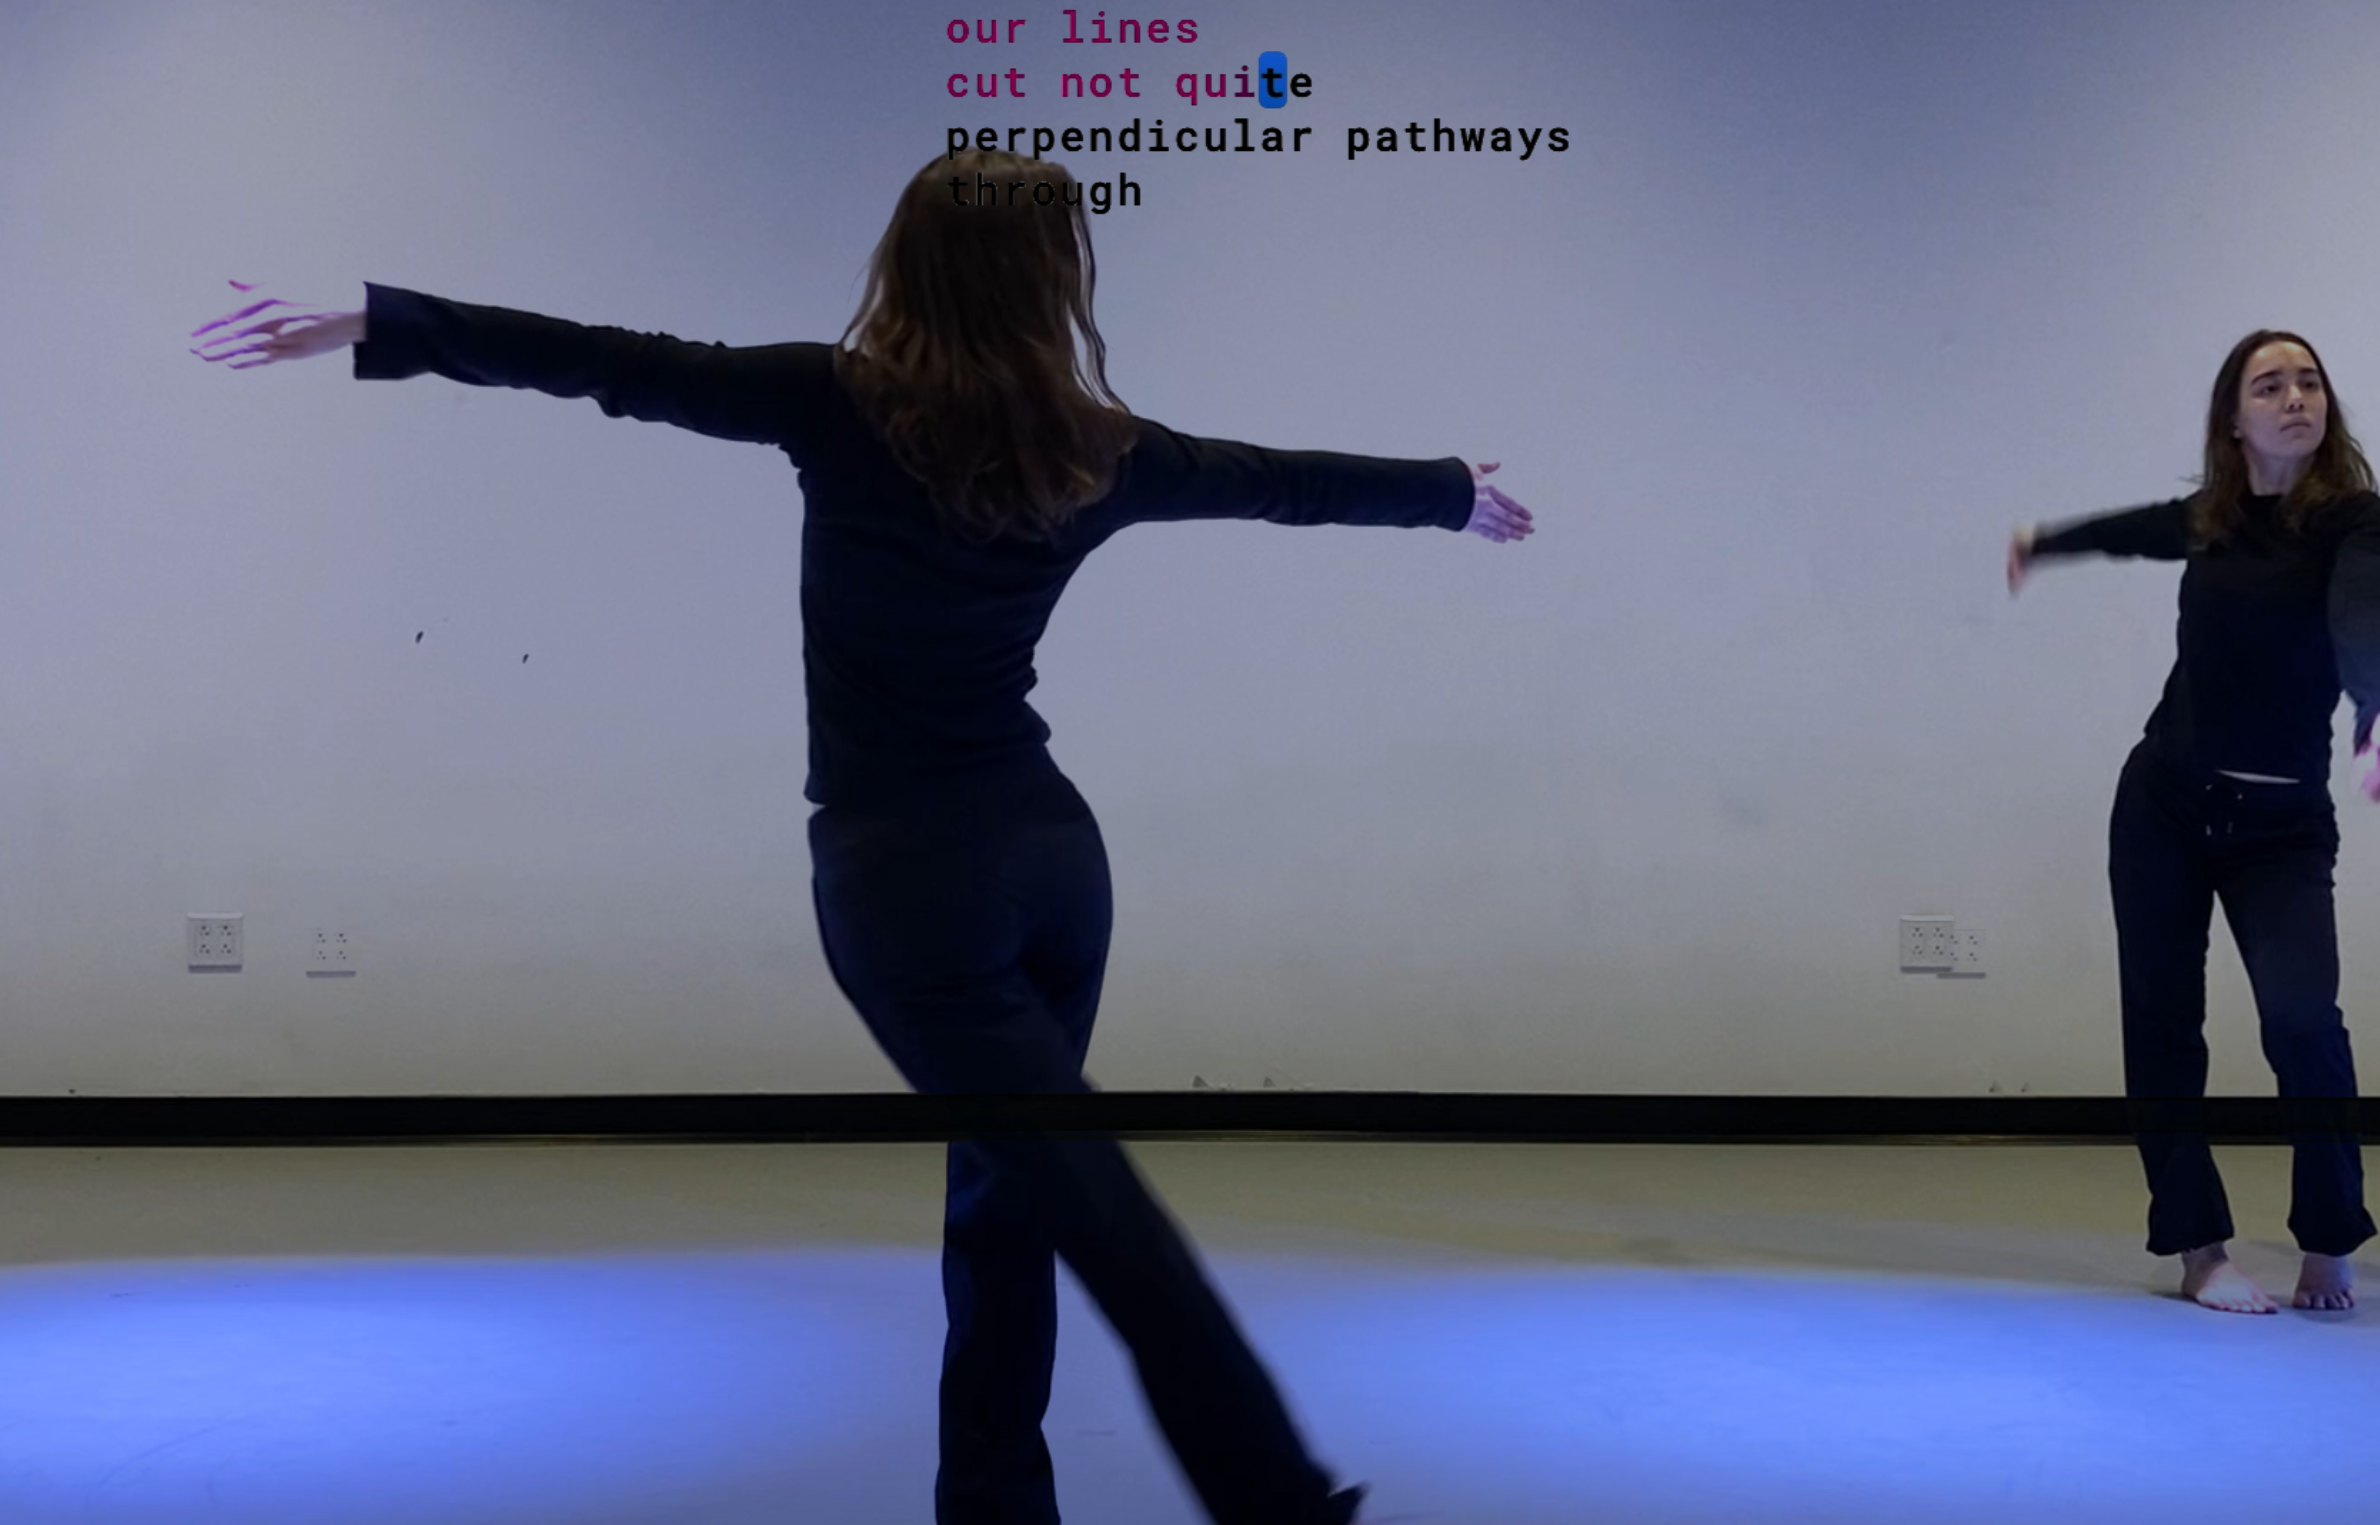 Dancer clad in black pants and shirt pictured from the back with their arms extended into a slanted T and their left leg extended behind and diagonal to their right leg. The dancer's front body is mirrored in the front right side of the image. Coming down from the top of the image is poetic text by Allie Costa: our lines/cut not quite/perpendicular pathways/through. 